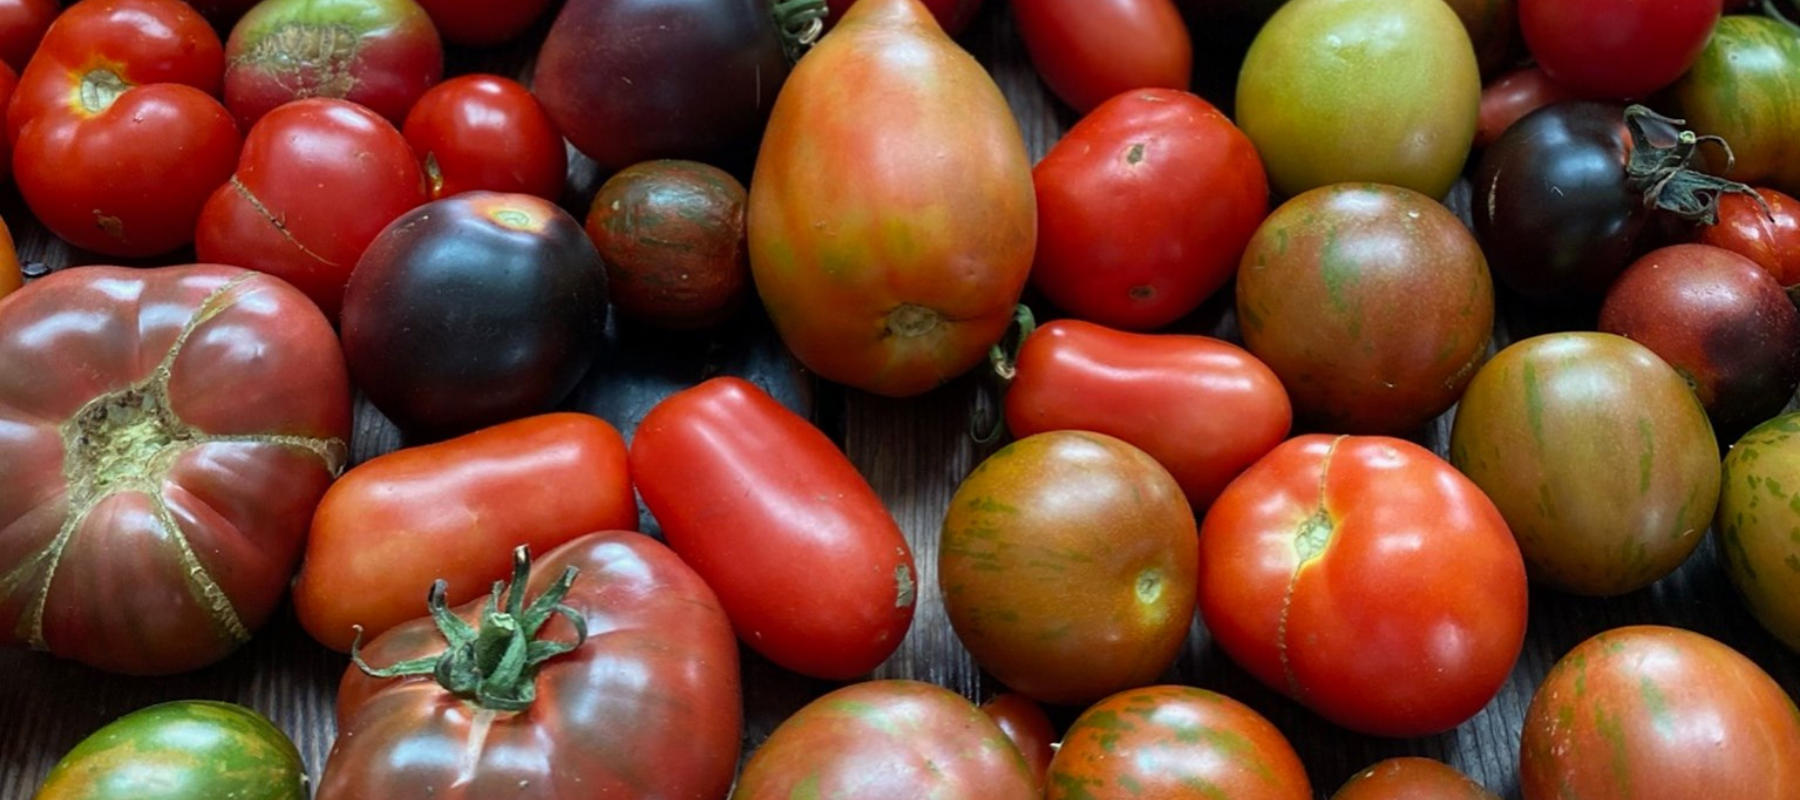 How science ruined tomatoes